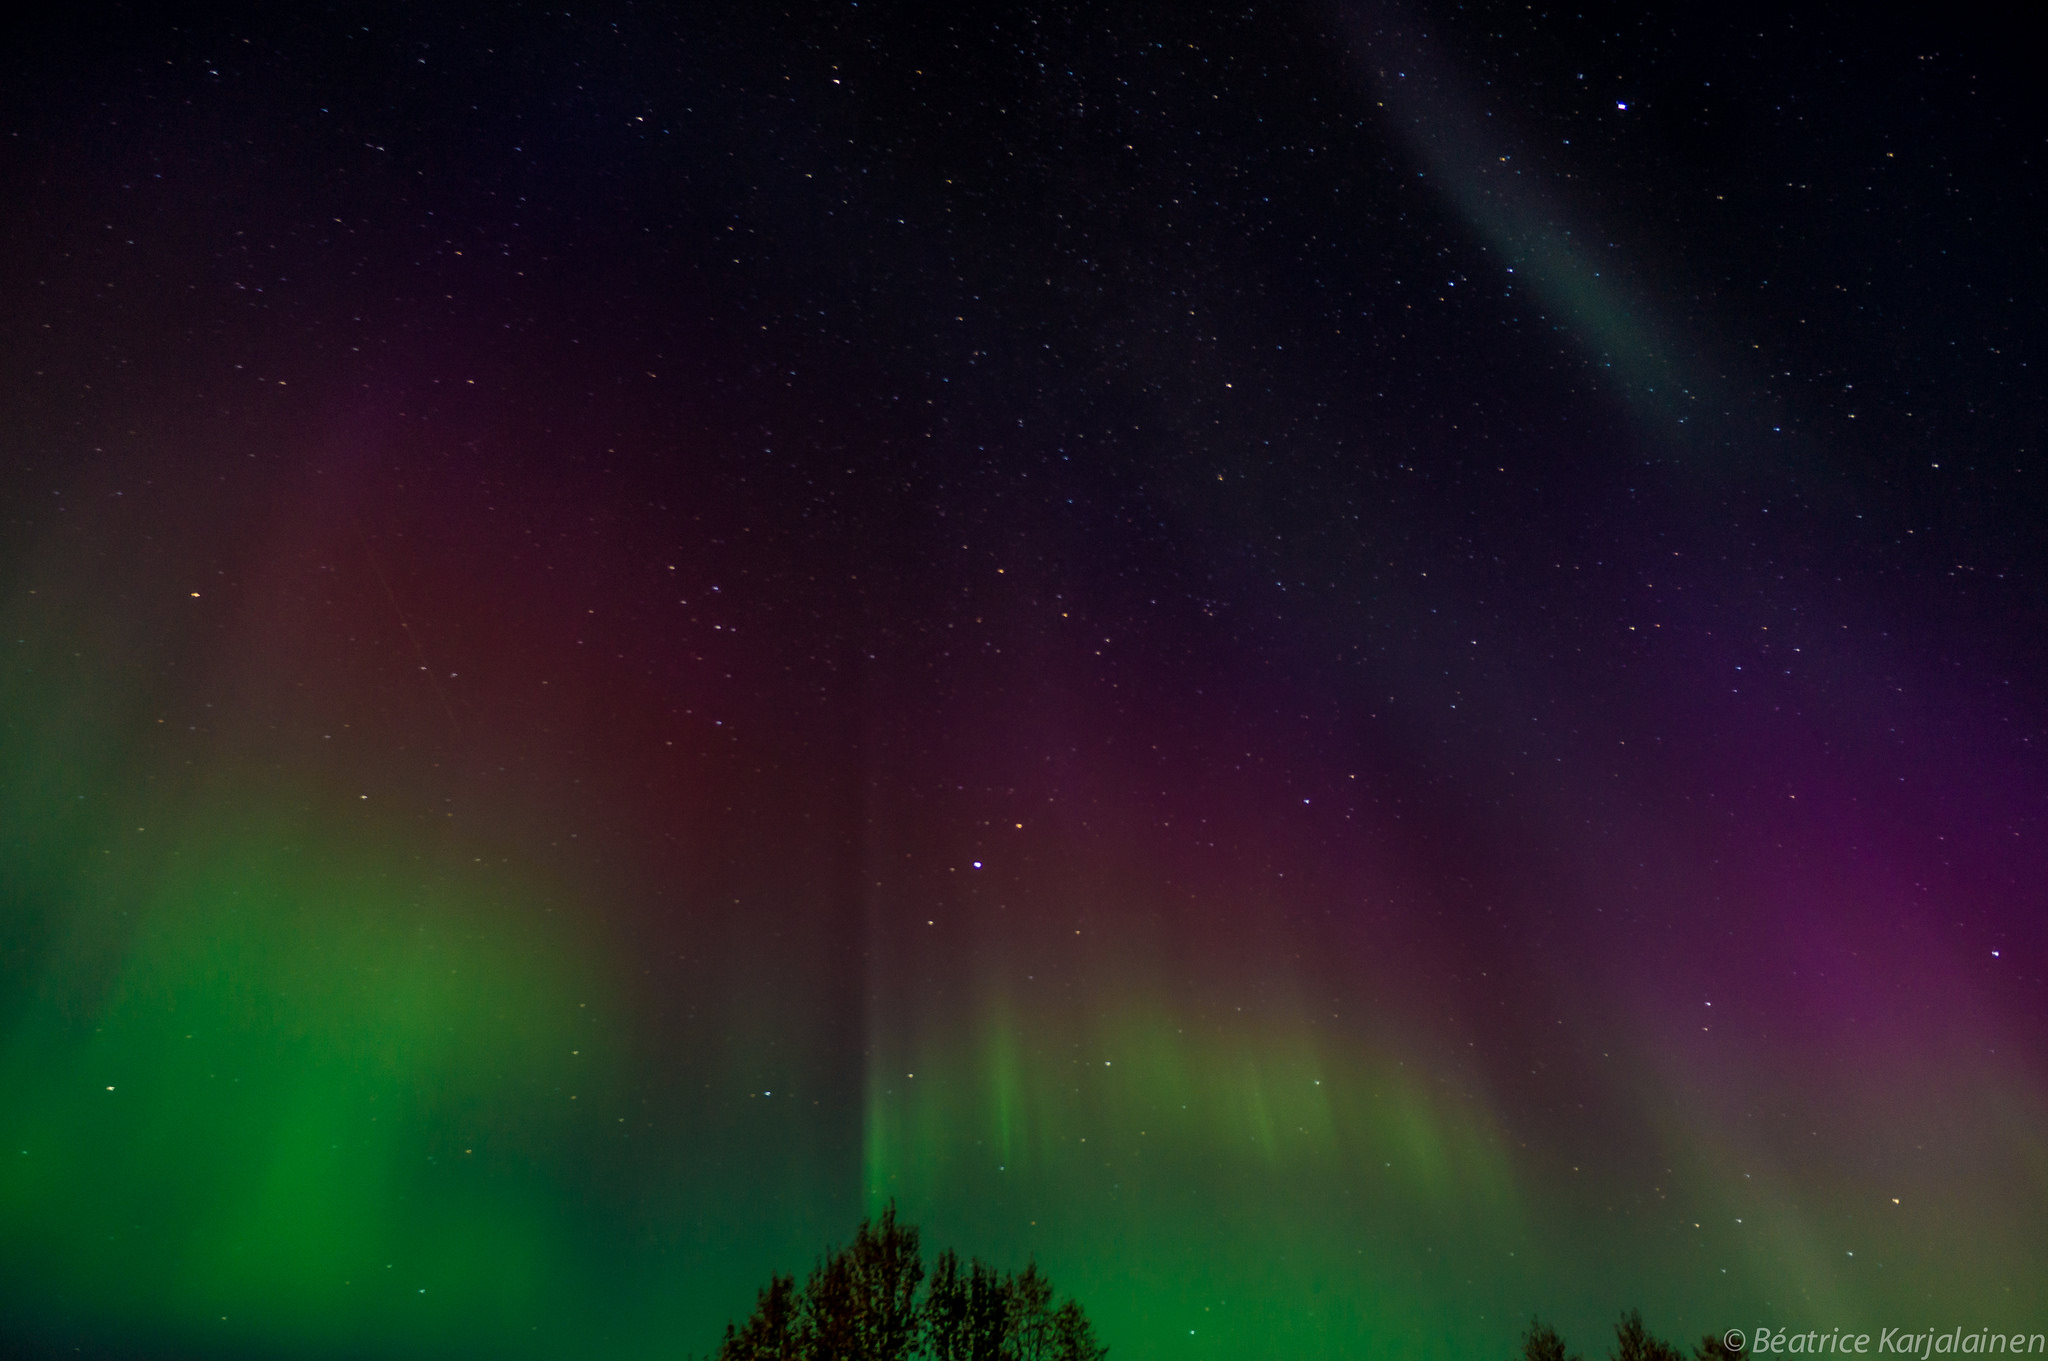 In the night sky, a rainbow aurora -- in vivid shades of green, gold, and violet -- fill the space above a silhouette of treeline.